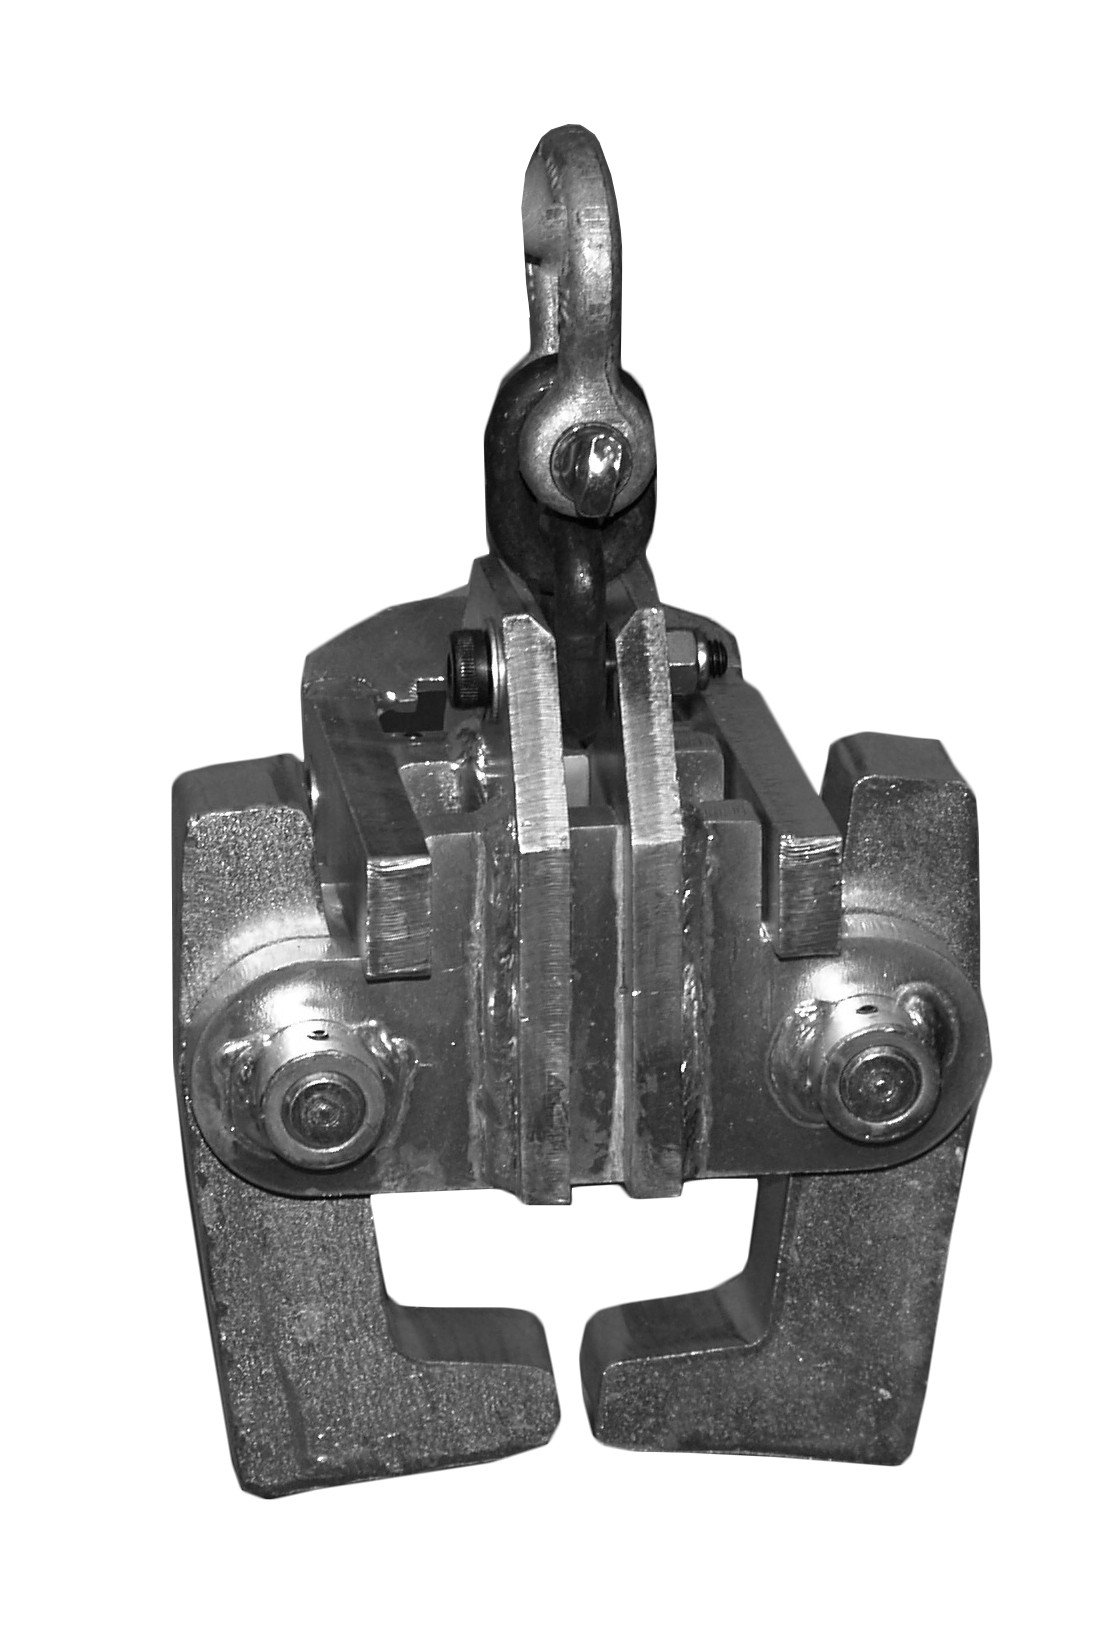 CLAMP, UNIVERSAL, USED IN CONJUNTION WITH STEL IRONMEN,SUITABLE FOR USE ON UIC60, 113LB & BULLHEAD, RAIL TESTED TO 1500KG